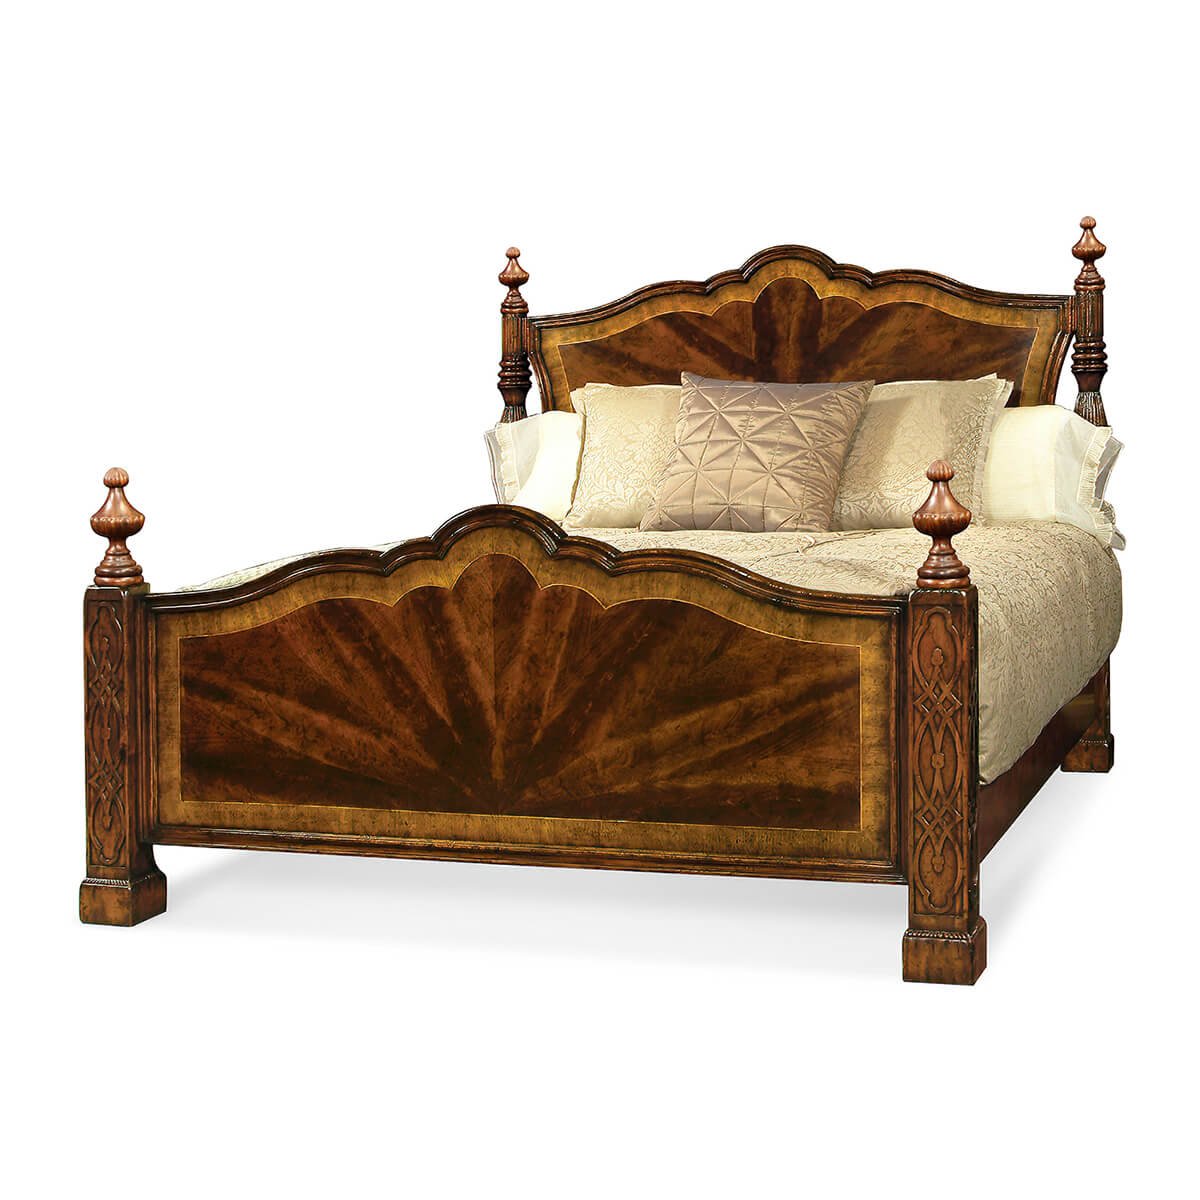 Chippendale Mahogany Four Post Bed - US KING - English Georgian America